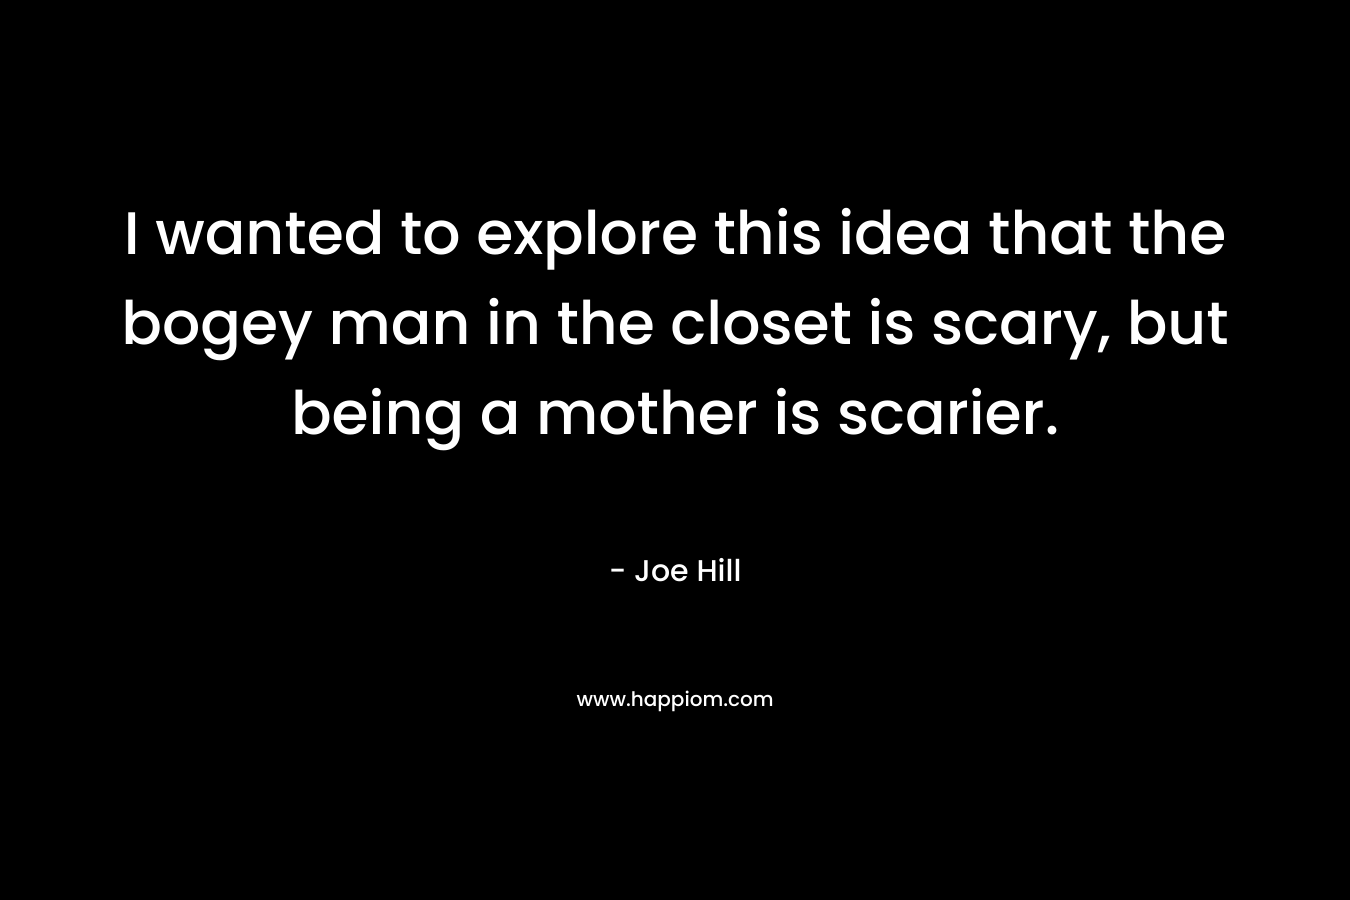 I wanted to explore this idea that the bogey man in the closet is scary, but being a mother is scarier. – Joe Hill